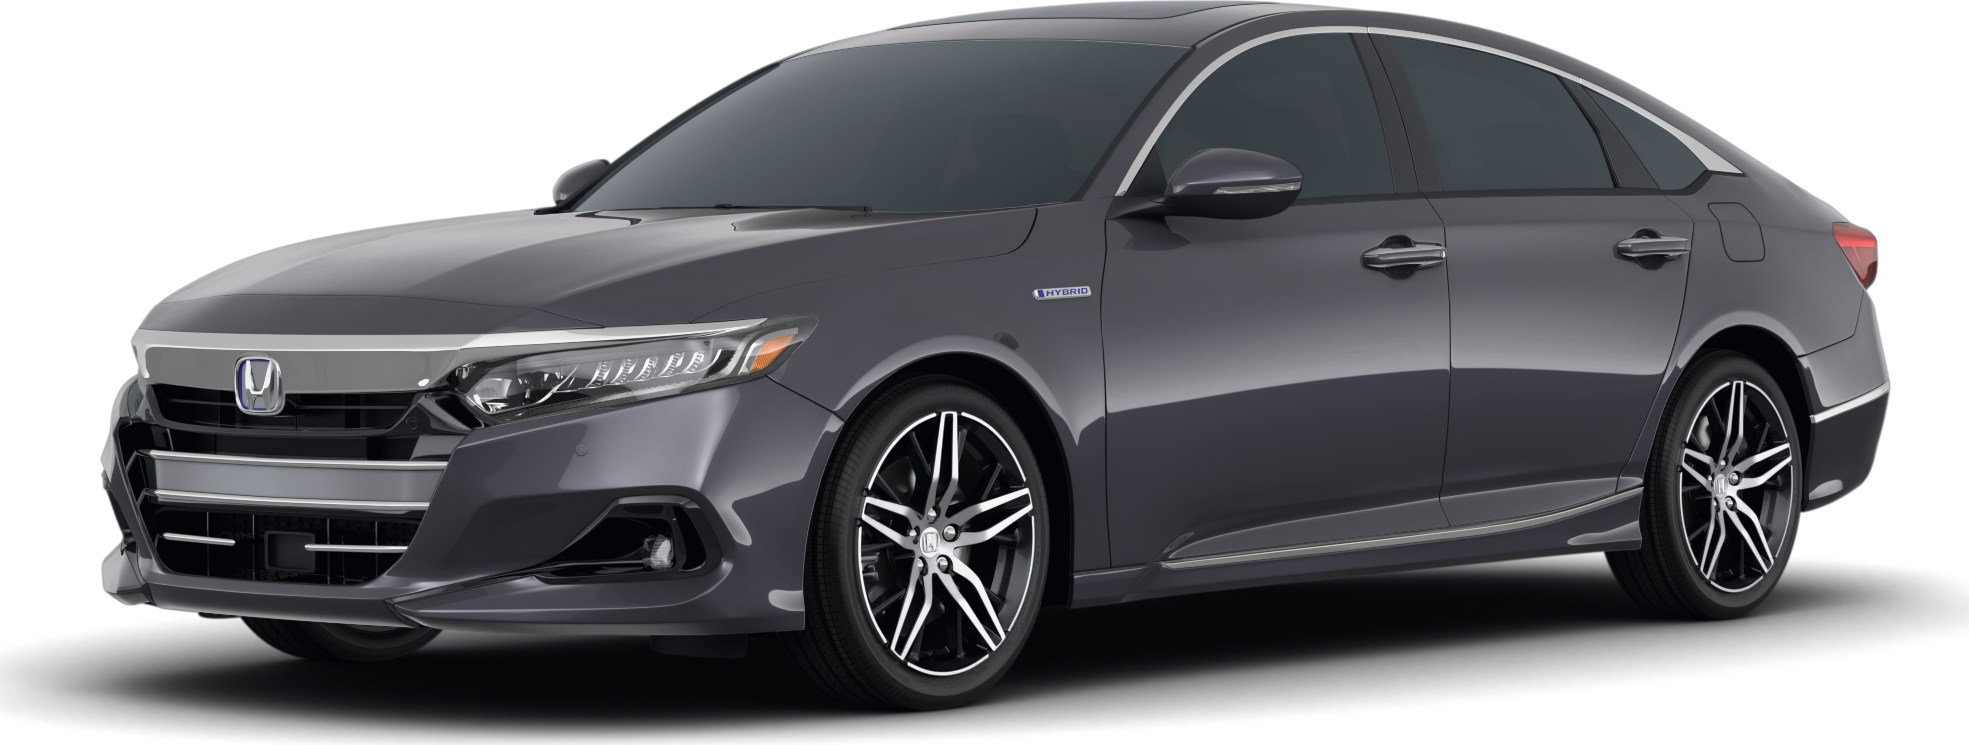 2021 Honda Accord Sport 2.0T First Test: The Midsize Sedan With a